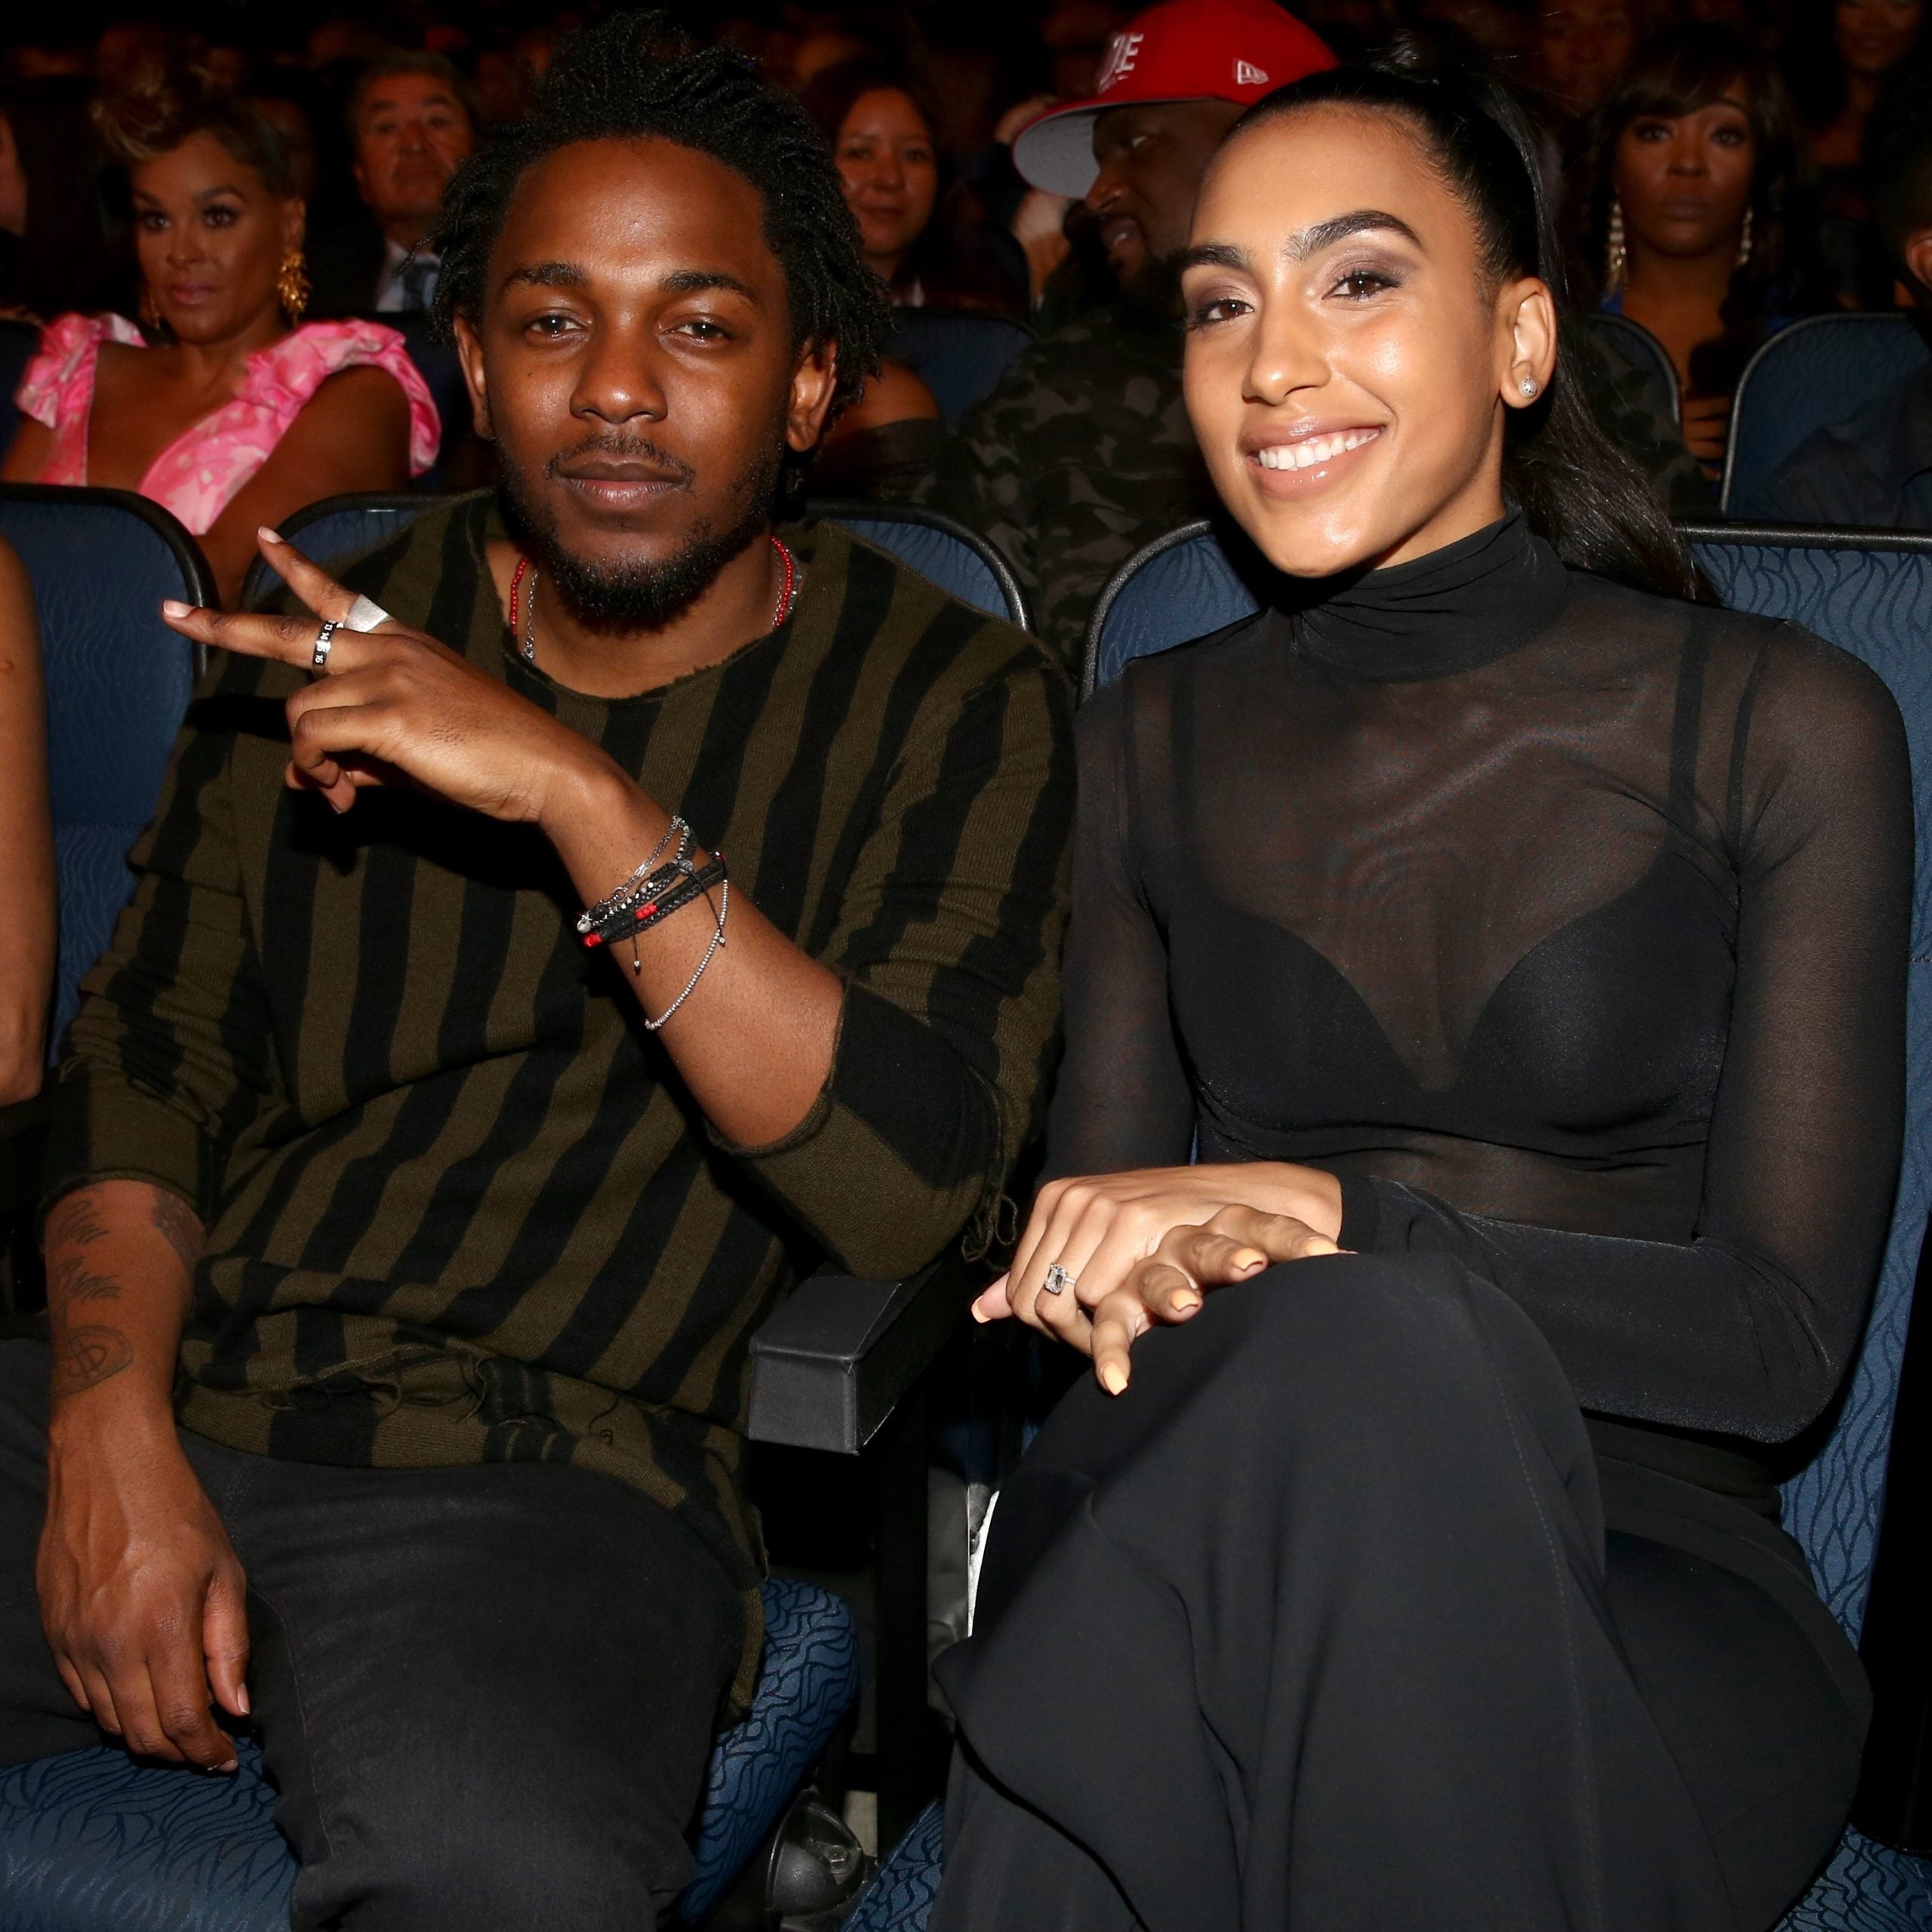 6 Adorable Pictures Of Kendrick Lamar And His Partner Whitney Alford Over The Years